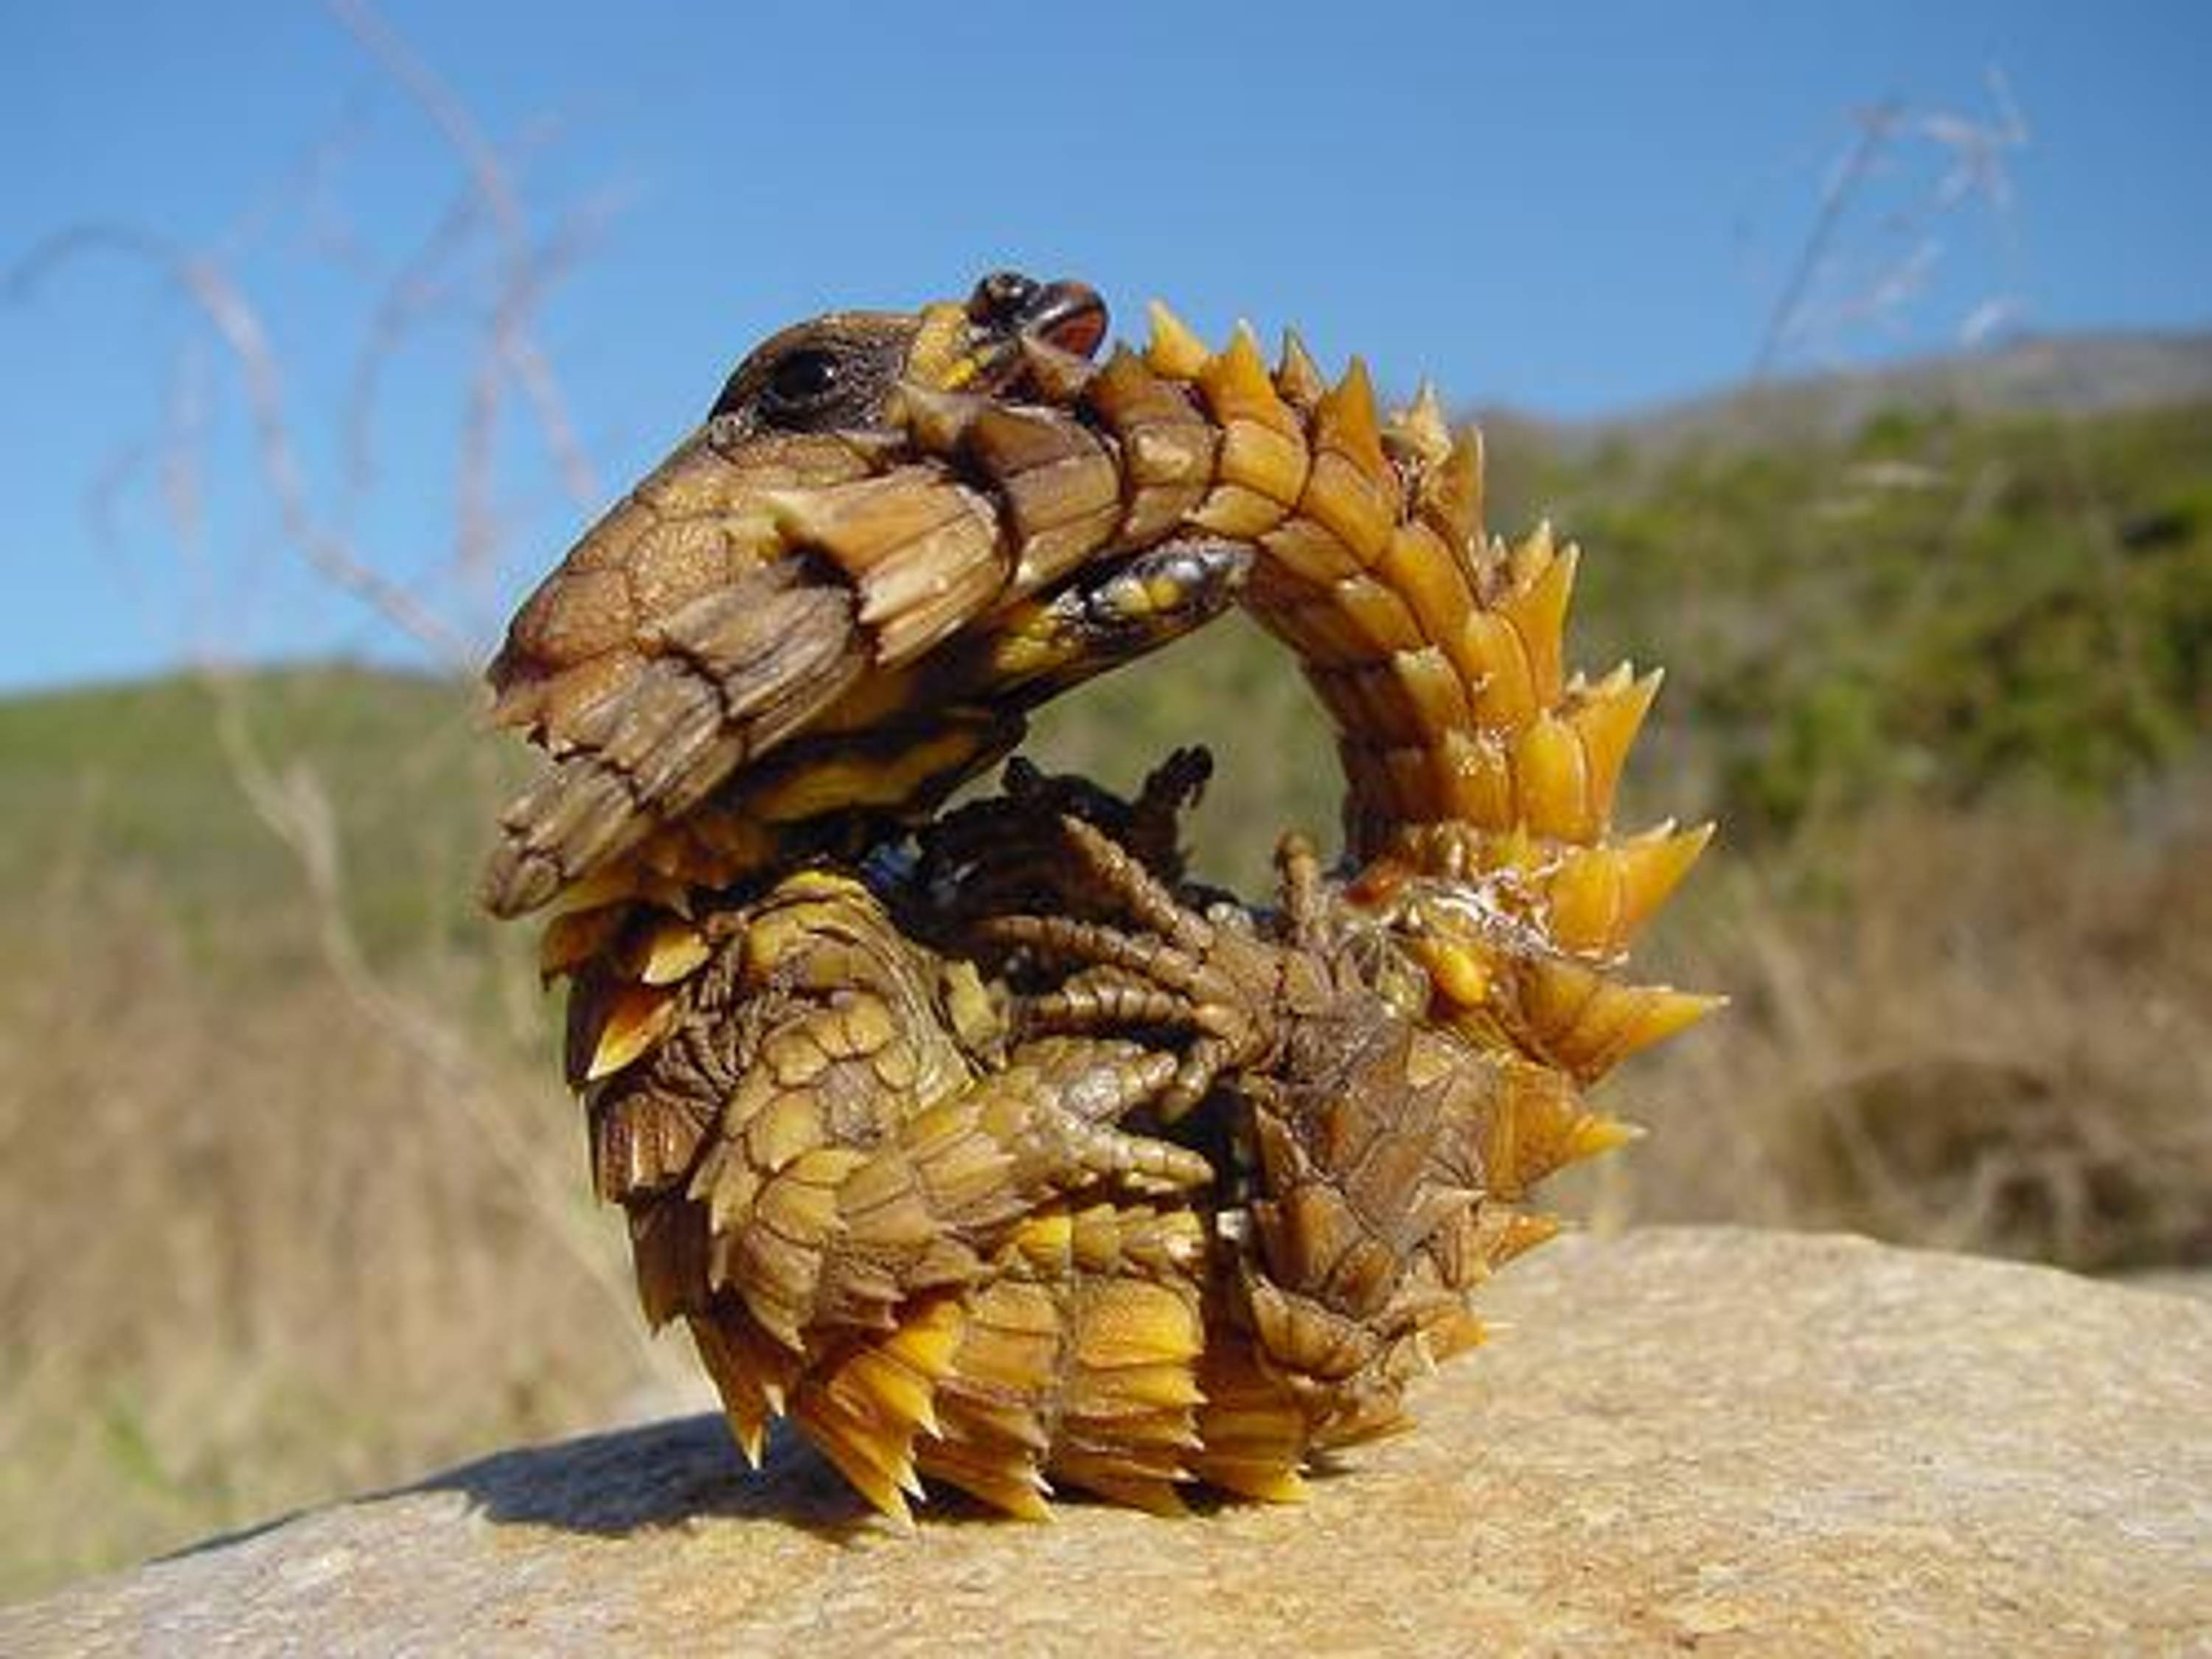 Thorny Devil - has a hydroscopic body drawing moisture from dew and rain to its mouth by capillary action allowing it to survive in arid deserts